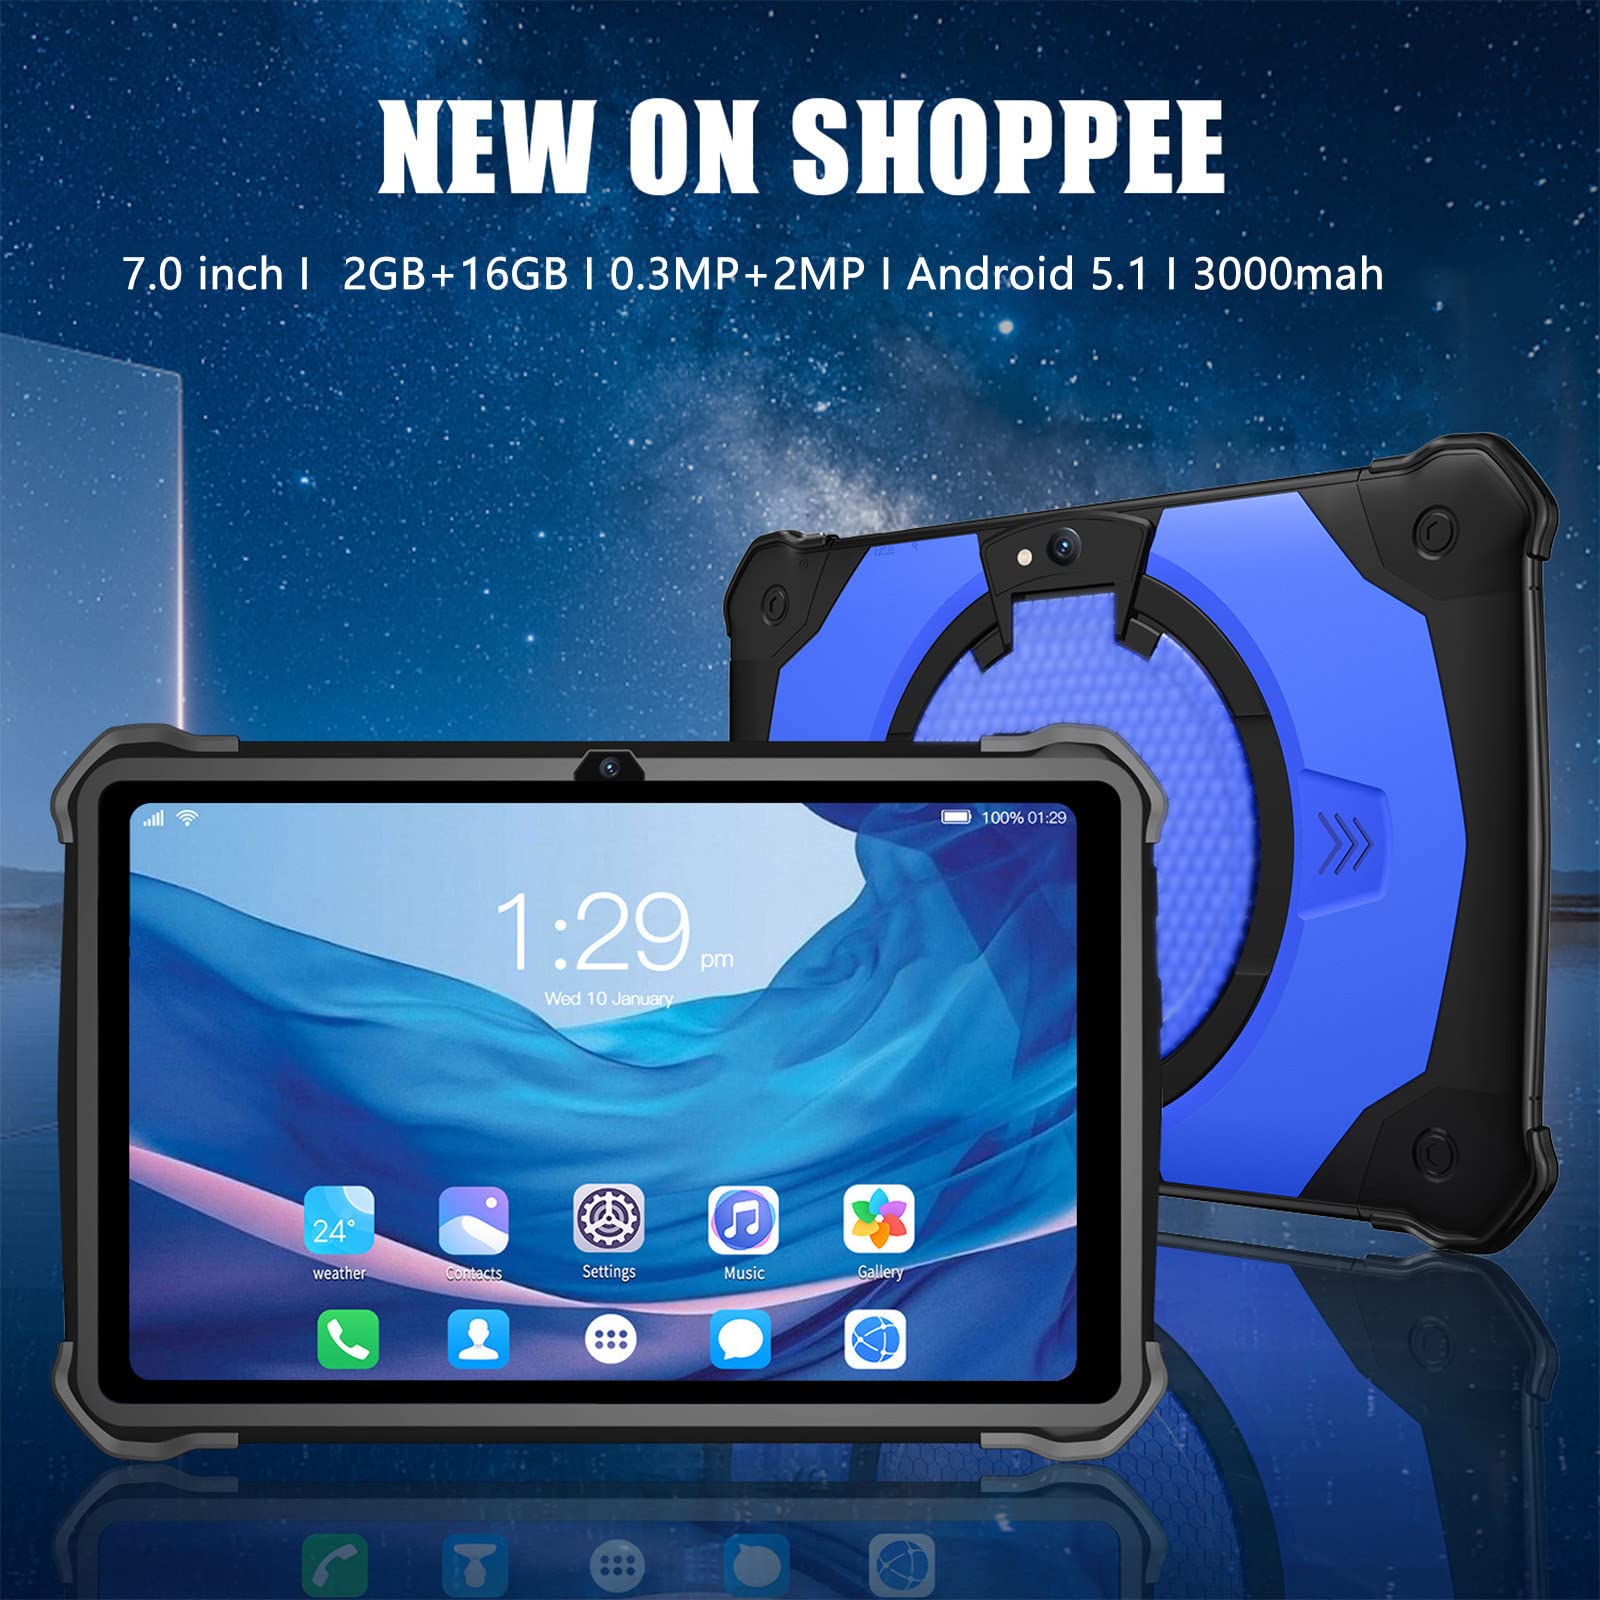 ufehgfjh HD 7 Inch Android 5.1 Tablet IPS High Definition Screen 0.3 Mp Front & 2 Mp Rear Camera WiFi Bluetooth Voice Call Game Video Learning Tablet Function 3000mah Battery (Blue)